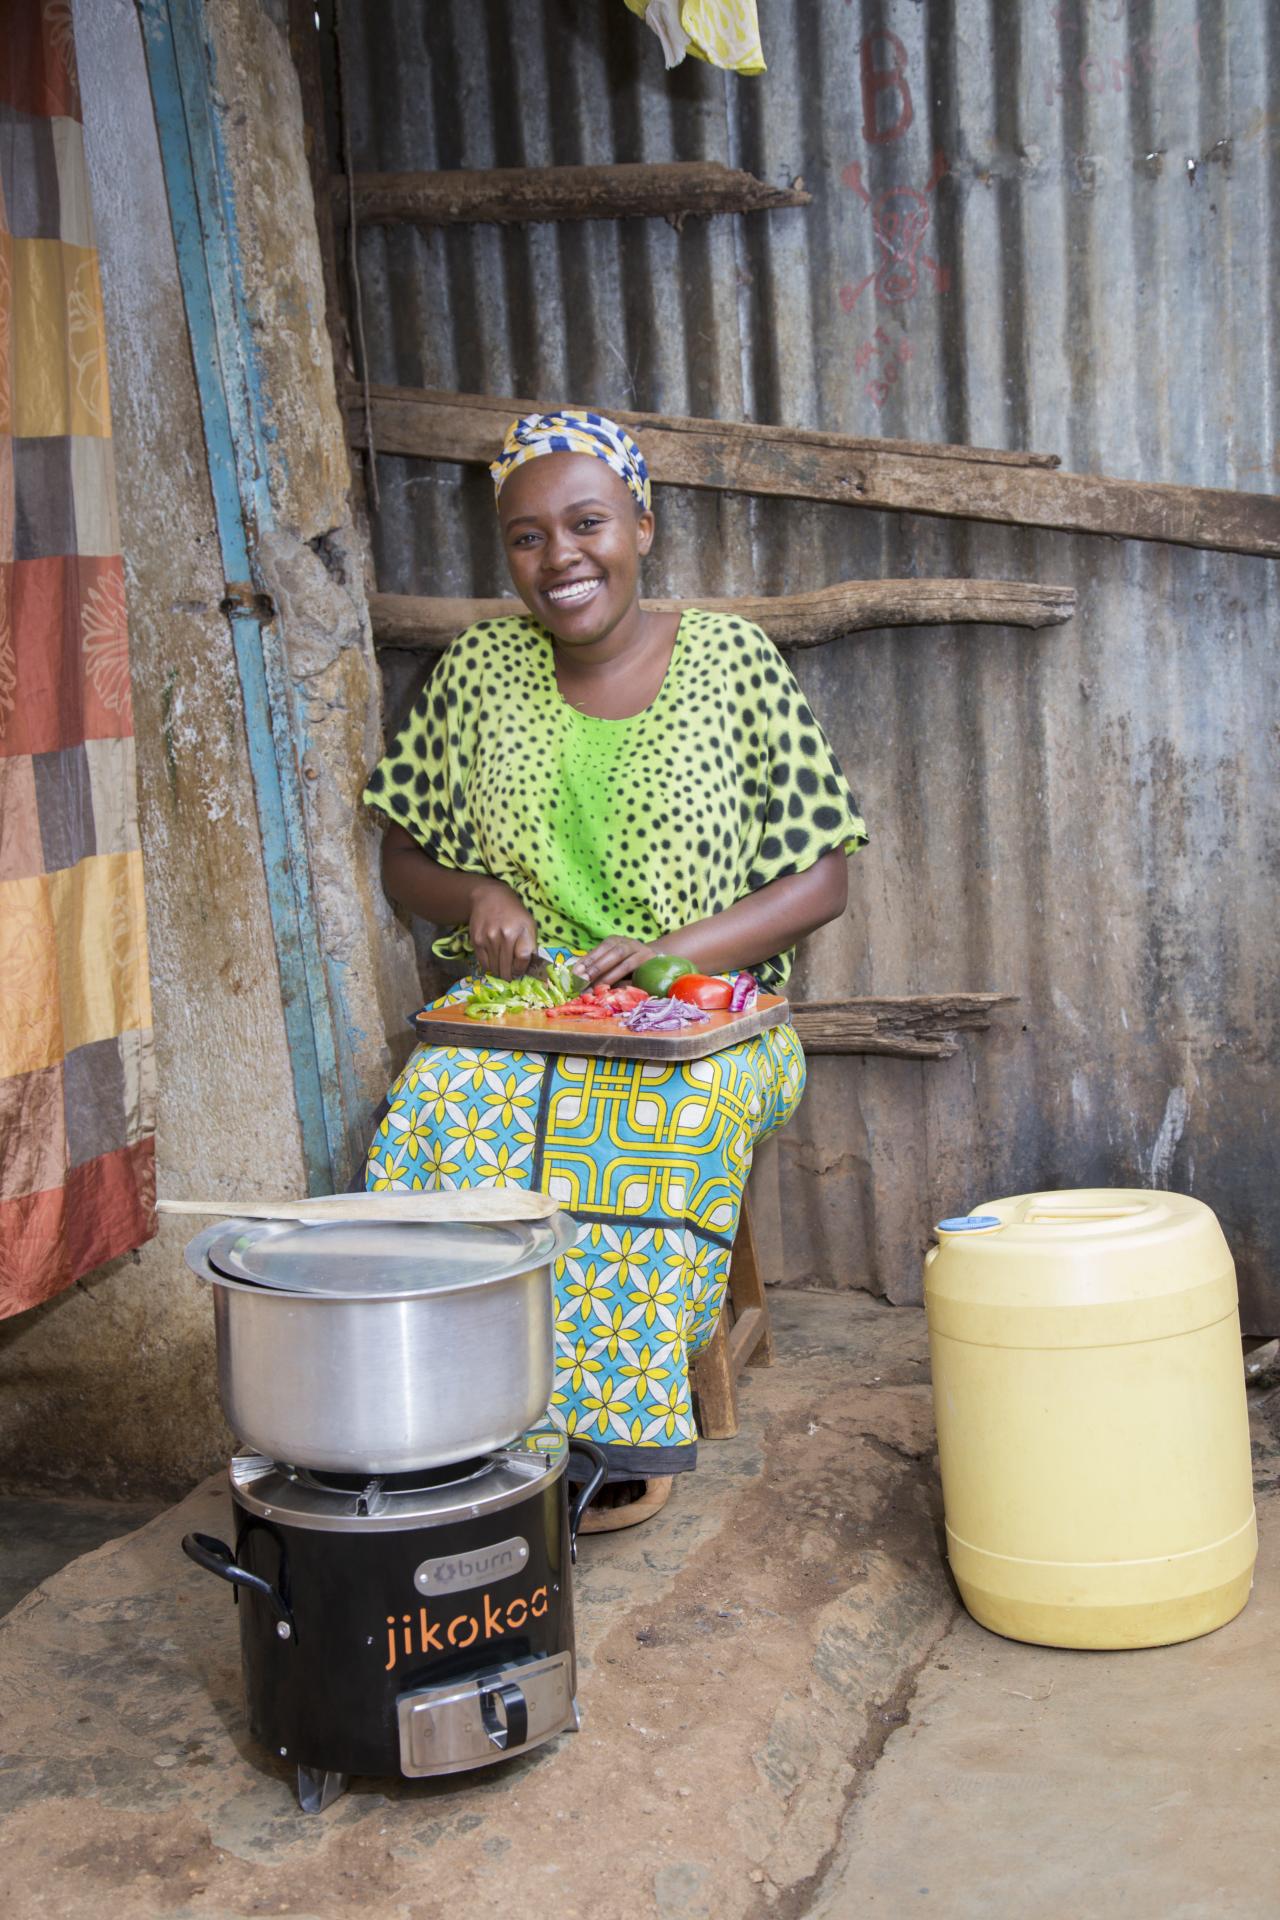 Picture of a woman cooking with a clean cooking stove in Africa - UN Climate Action Blog